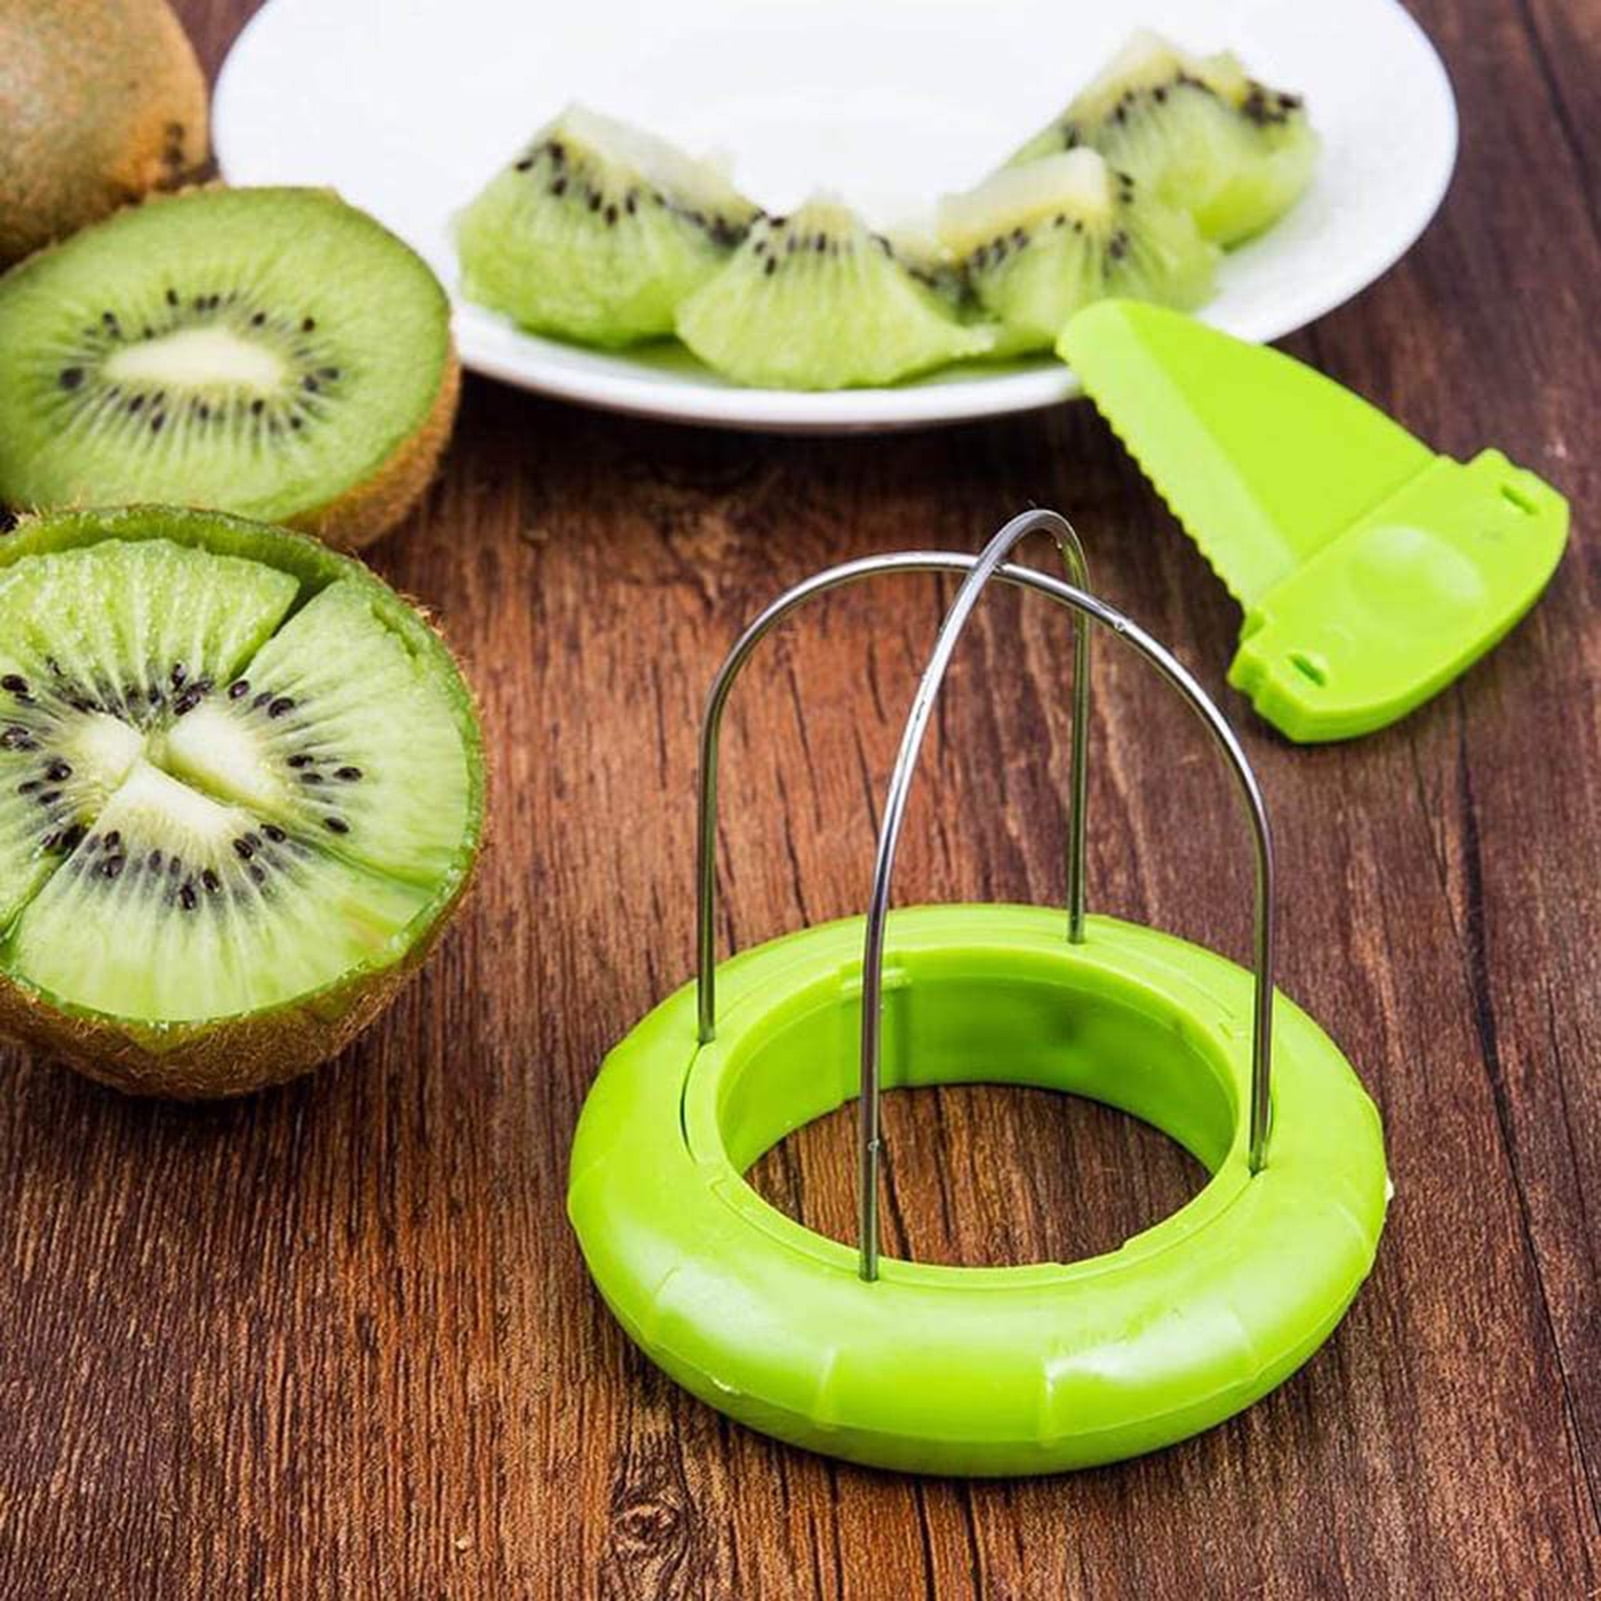 Stainless Steel Home Kitchen Tool Gadgets Kiwi Fruit Cutter Peeler Slicer ABS 